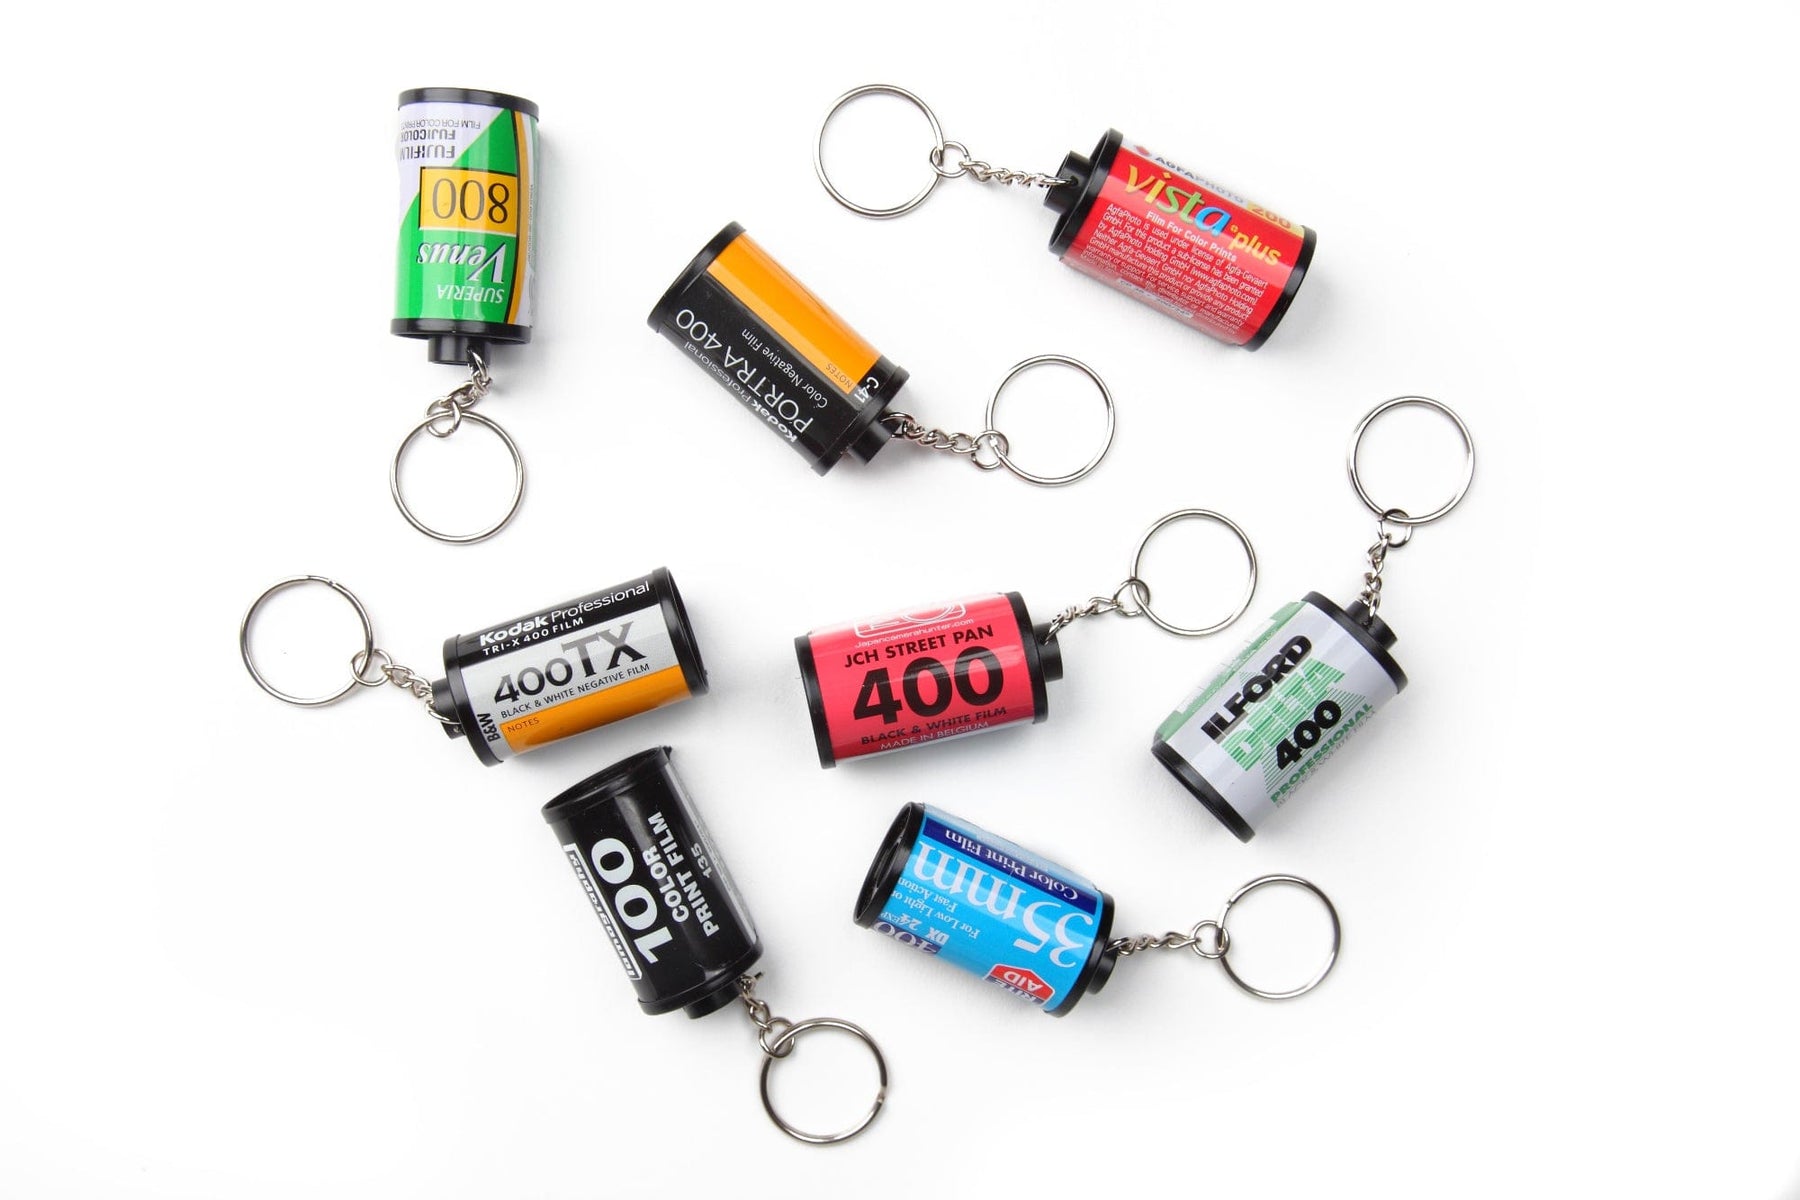 Retro Photo Reading 35mm Film Canister Keychain Kodacolor 200